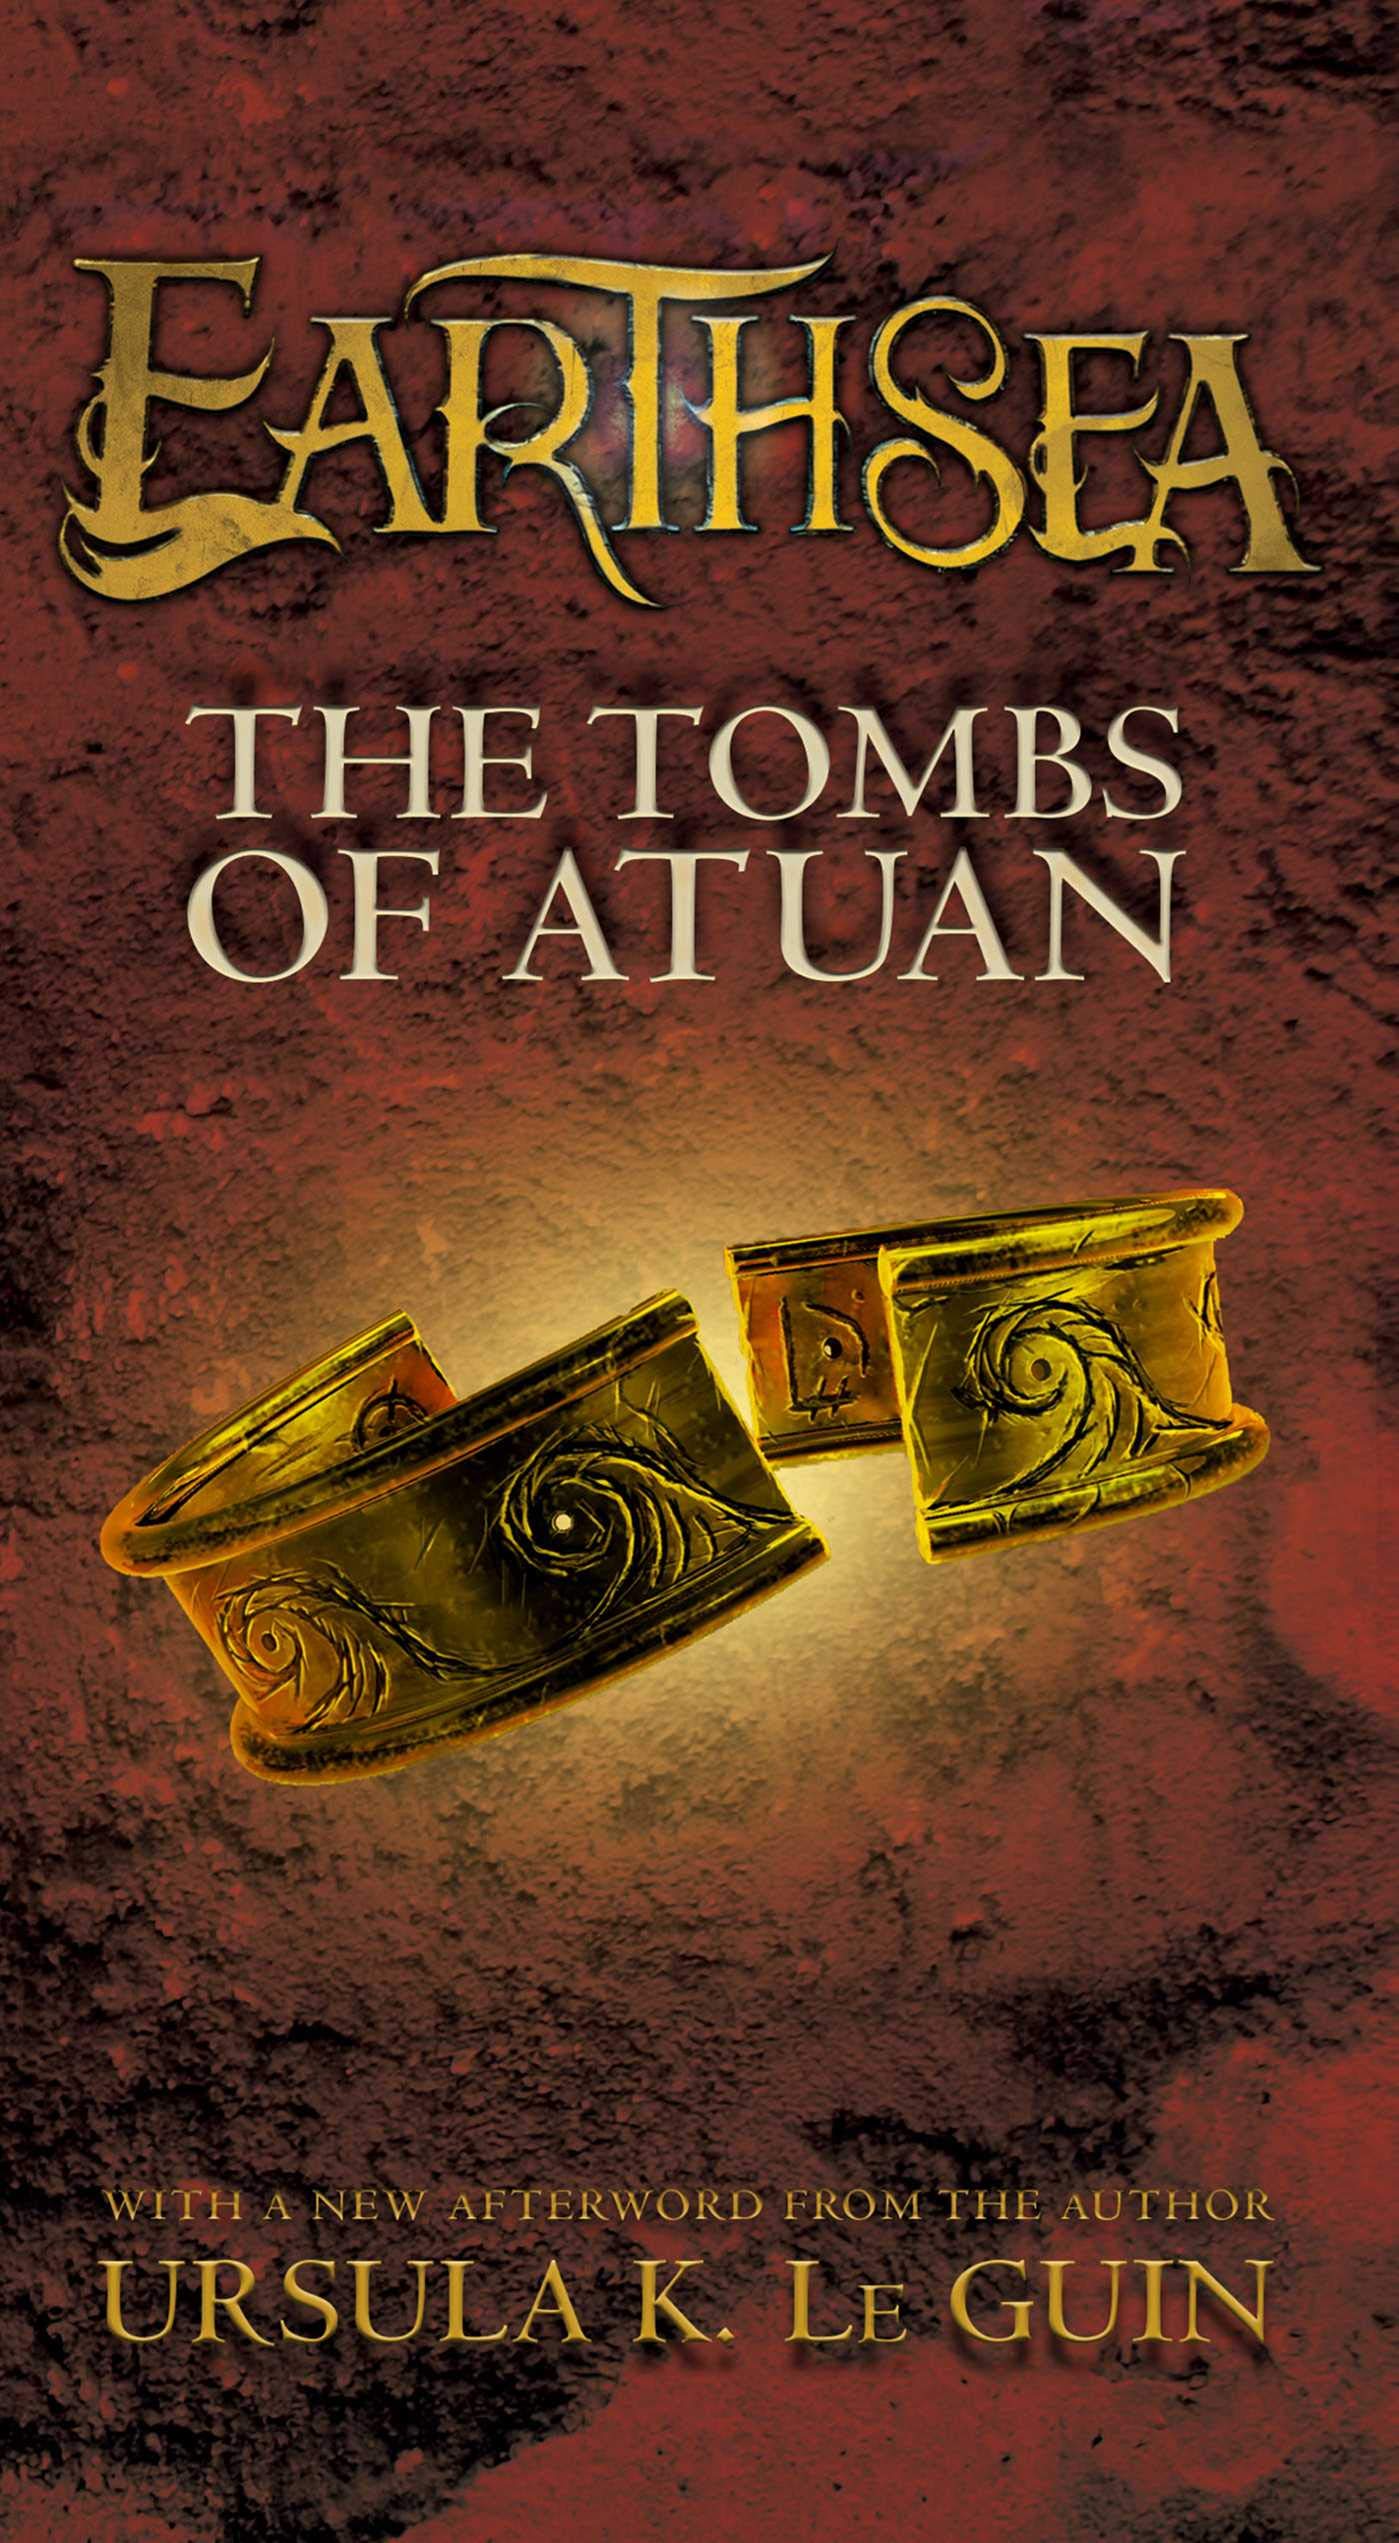 The Tombs of Atuan (The Earthsea Cycle Series Book 2)